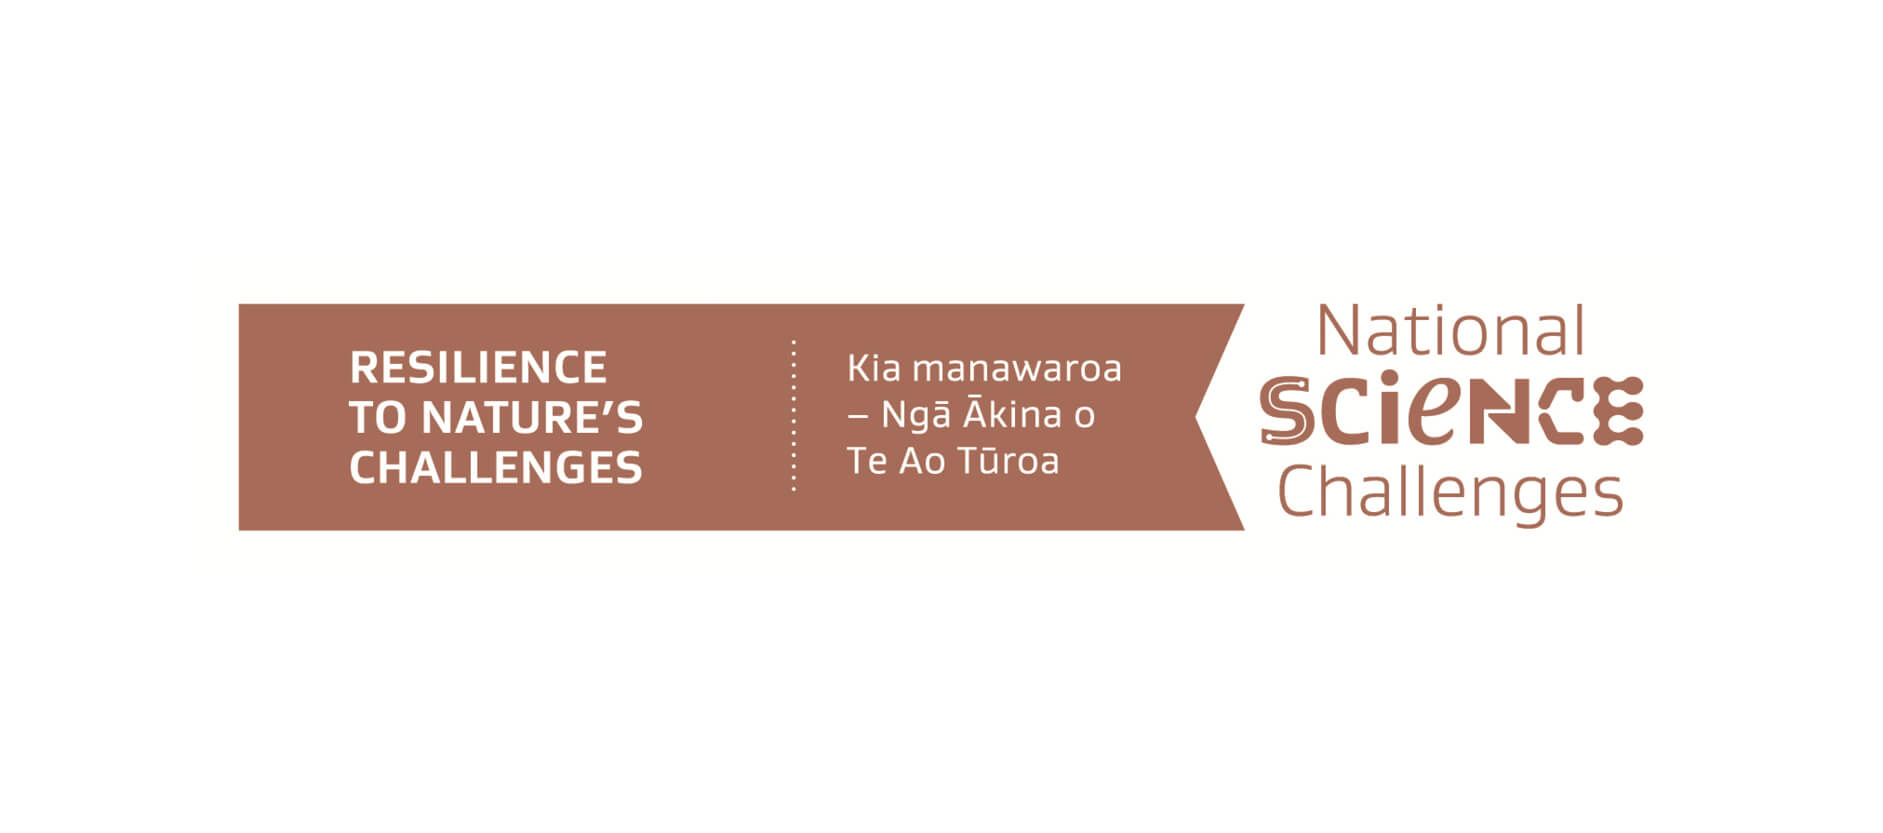 national science challenges logo